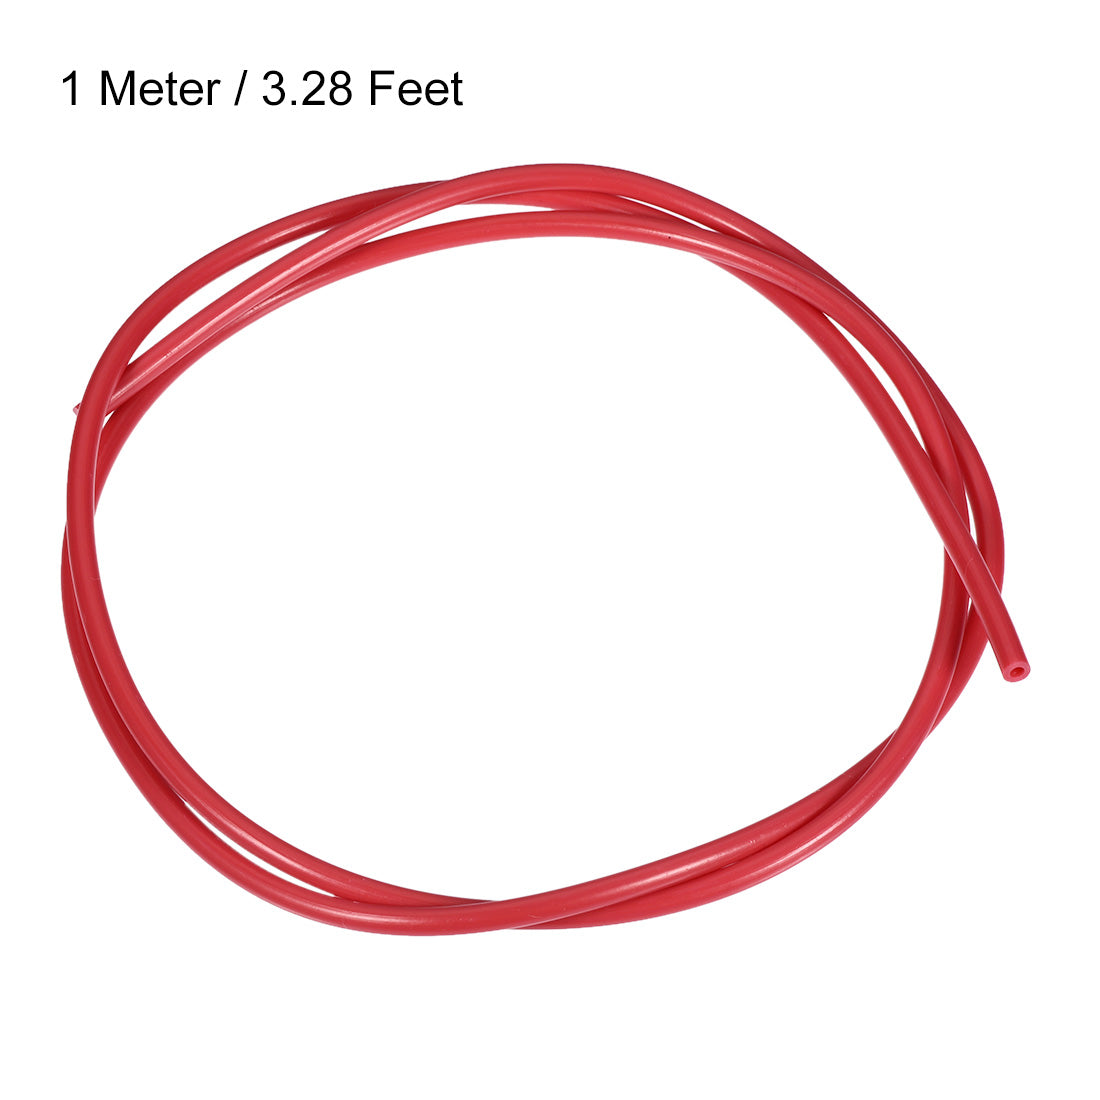 uxcell Uxcell PTFE Tube 3.2Ft - ID 2mm x OD 4mm Fit 1.75 Filament for 3D Printer Red 2pcs